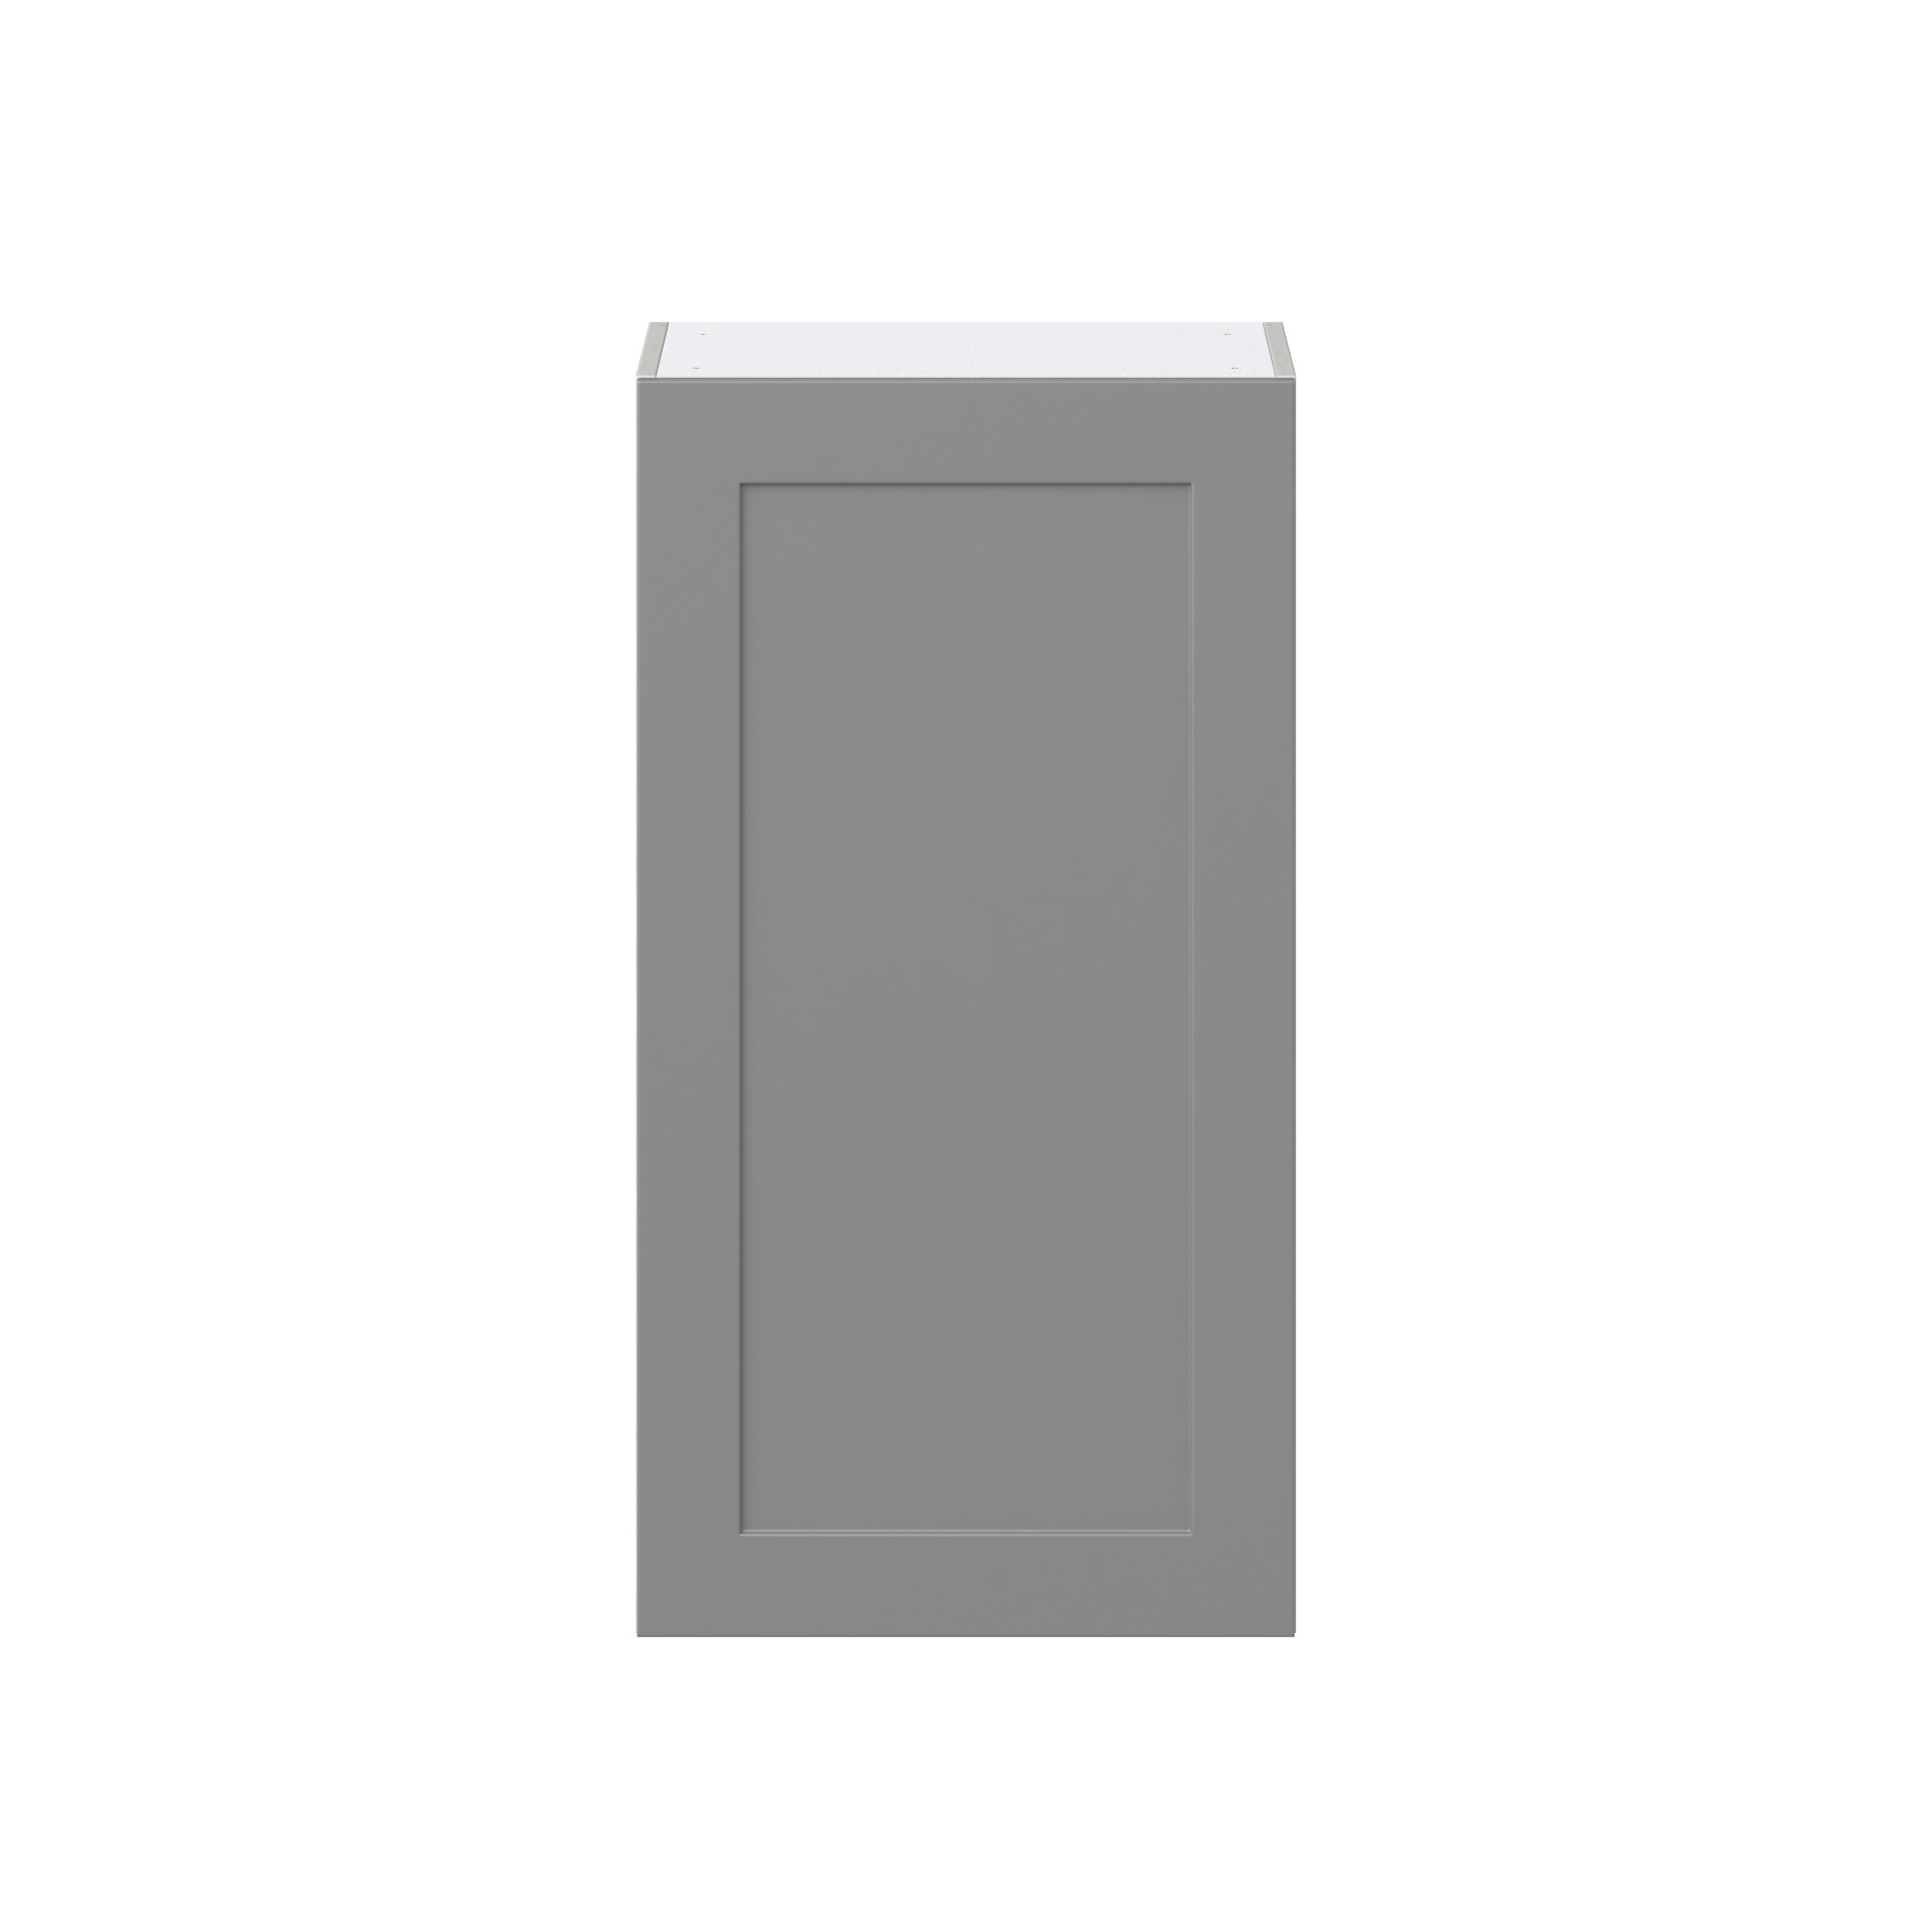 Willow Painted Slate Gray Shaker Assembled Wall Cabinet with Full High Door (21 in. W x 40 in. H x 14 in. D)